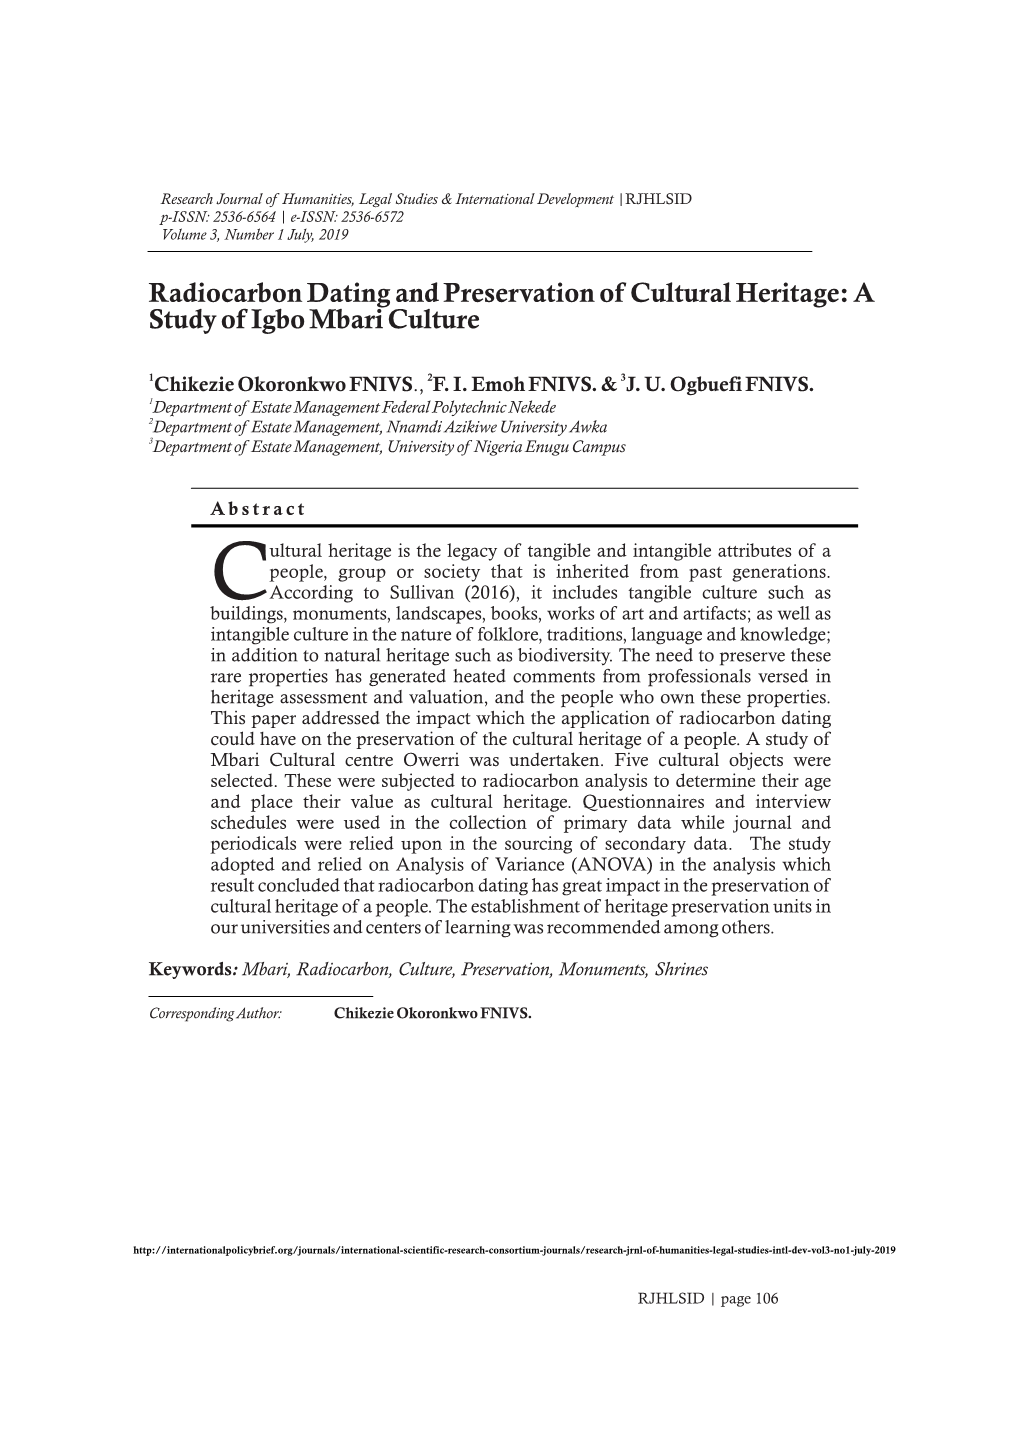 Radiocarbon Dating and Preservation of Cultural Heritage: a Study of Igbo Mbari Culture